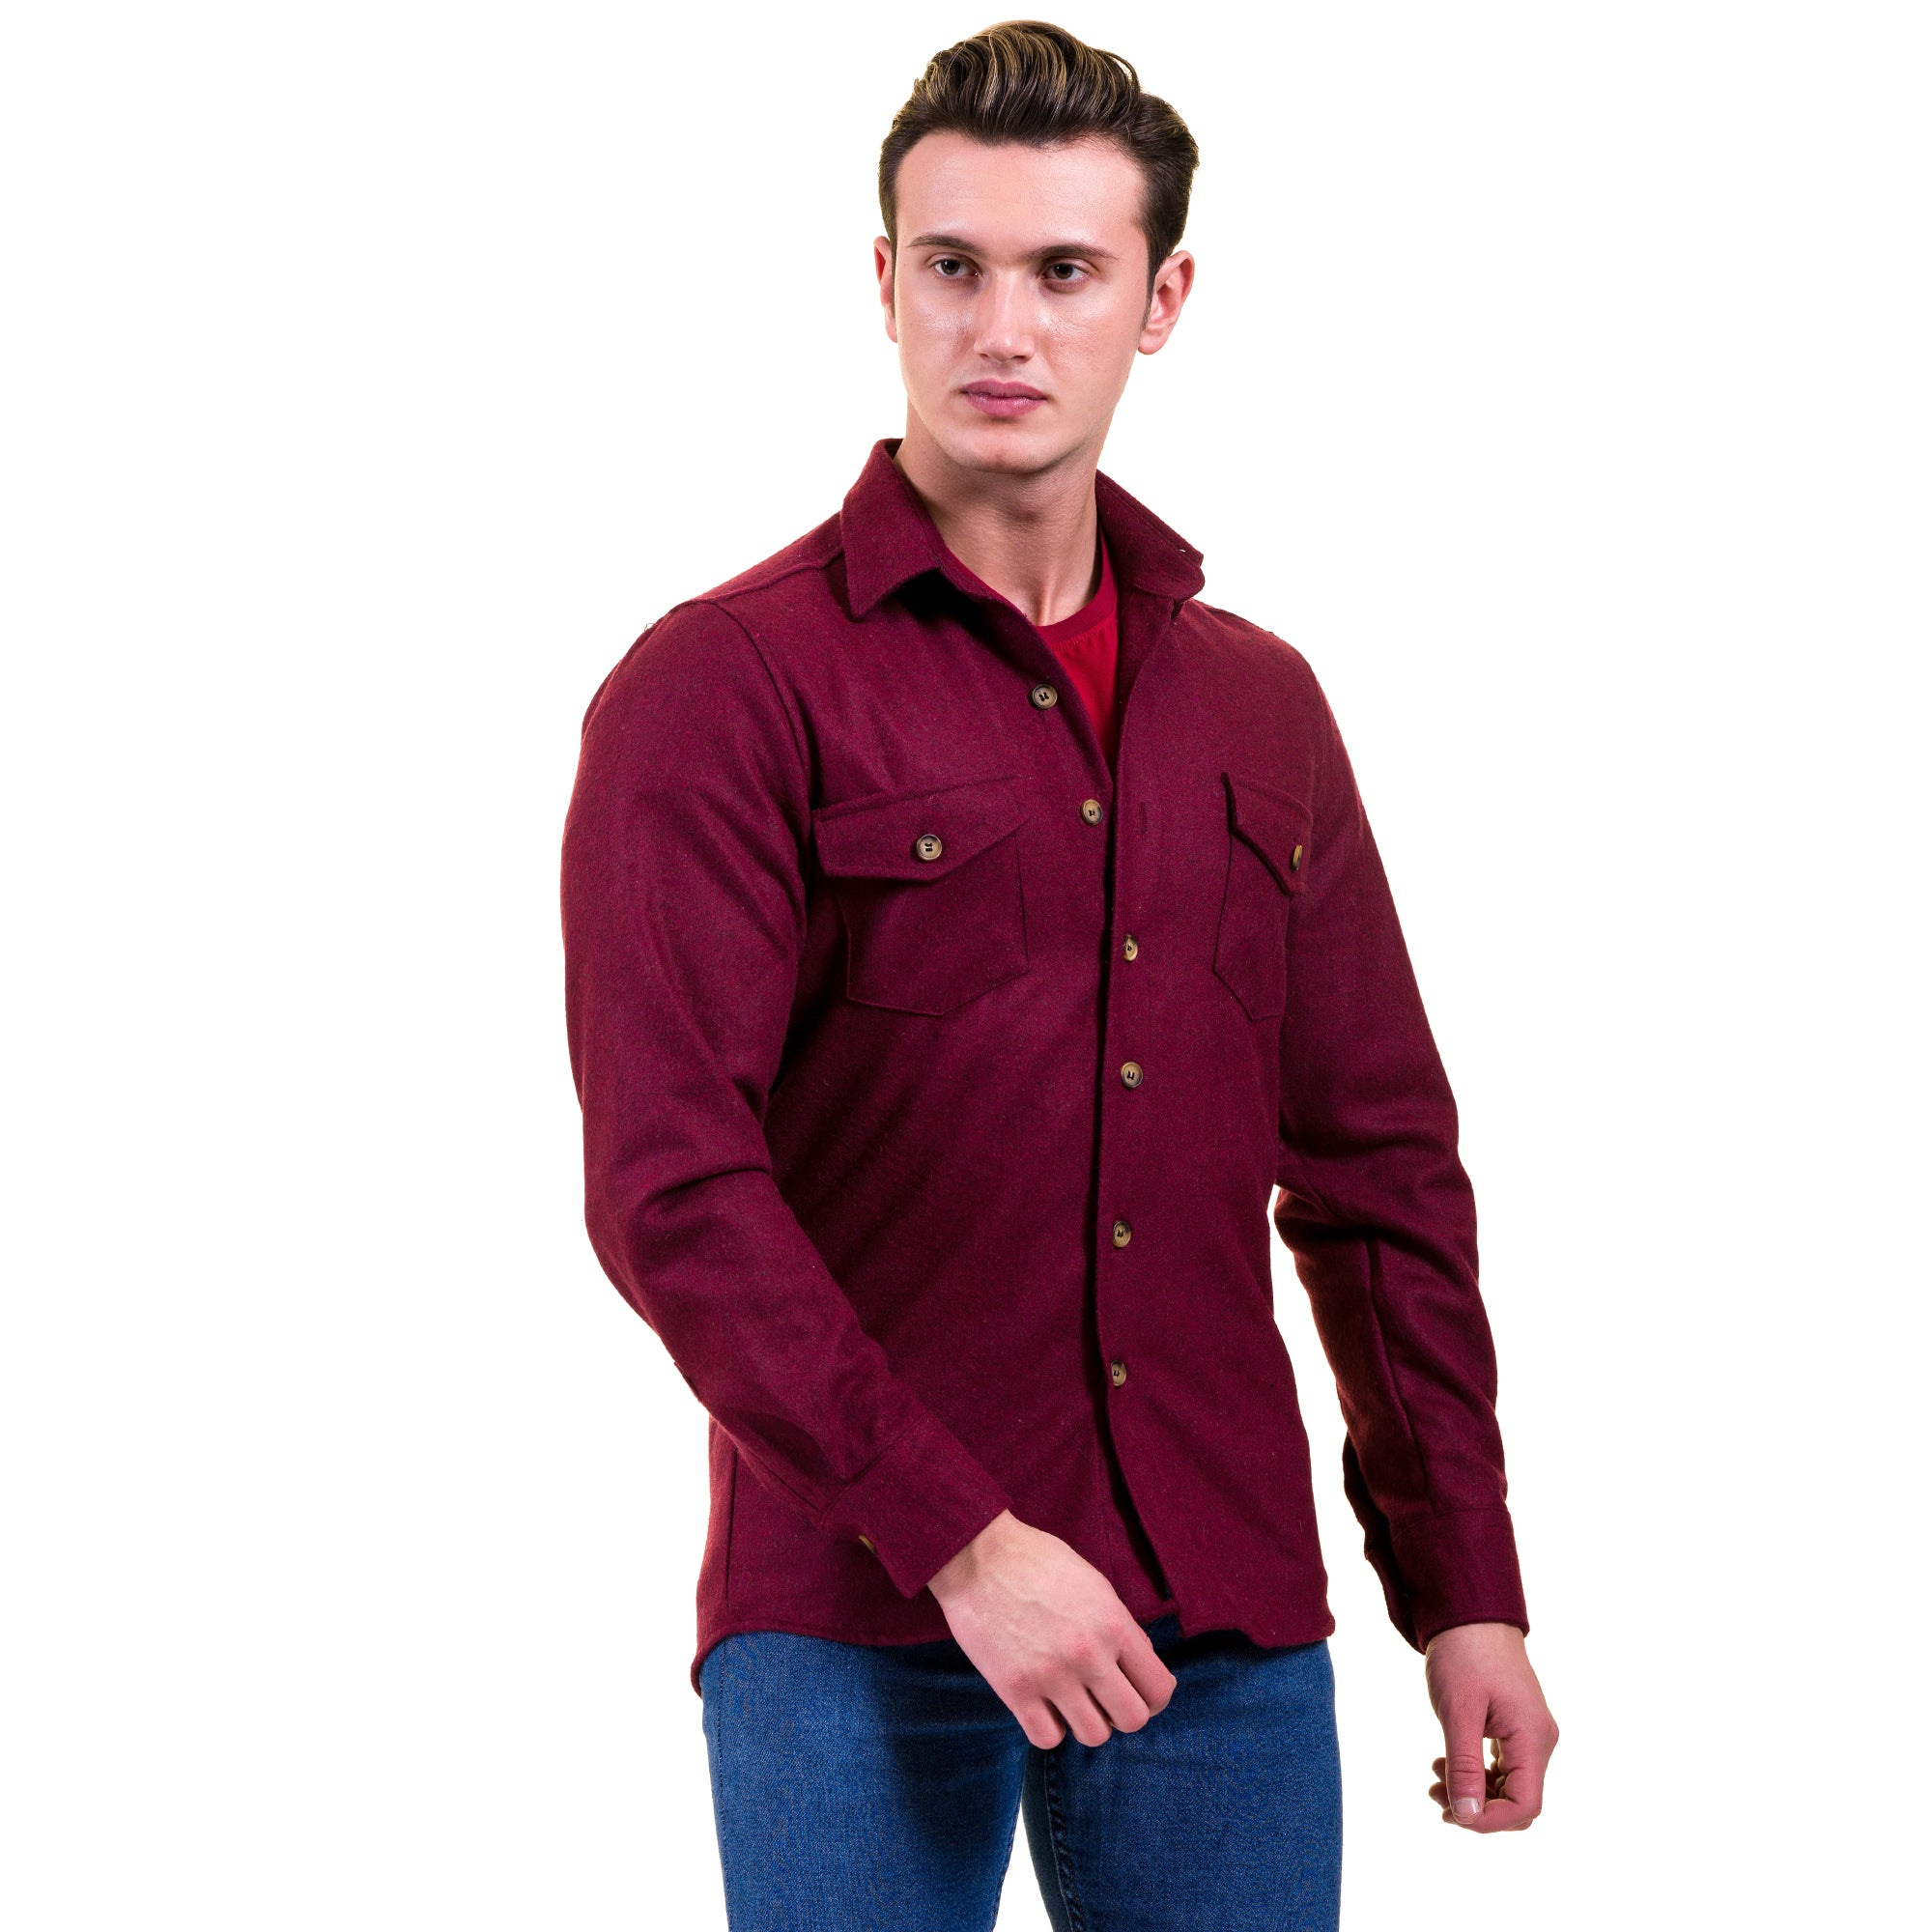 Solid Burgandy Mens Slim Fit Designer Dress Shirt - tailored Cotton Shirts for Work and Casual Wear